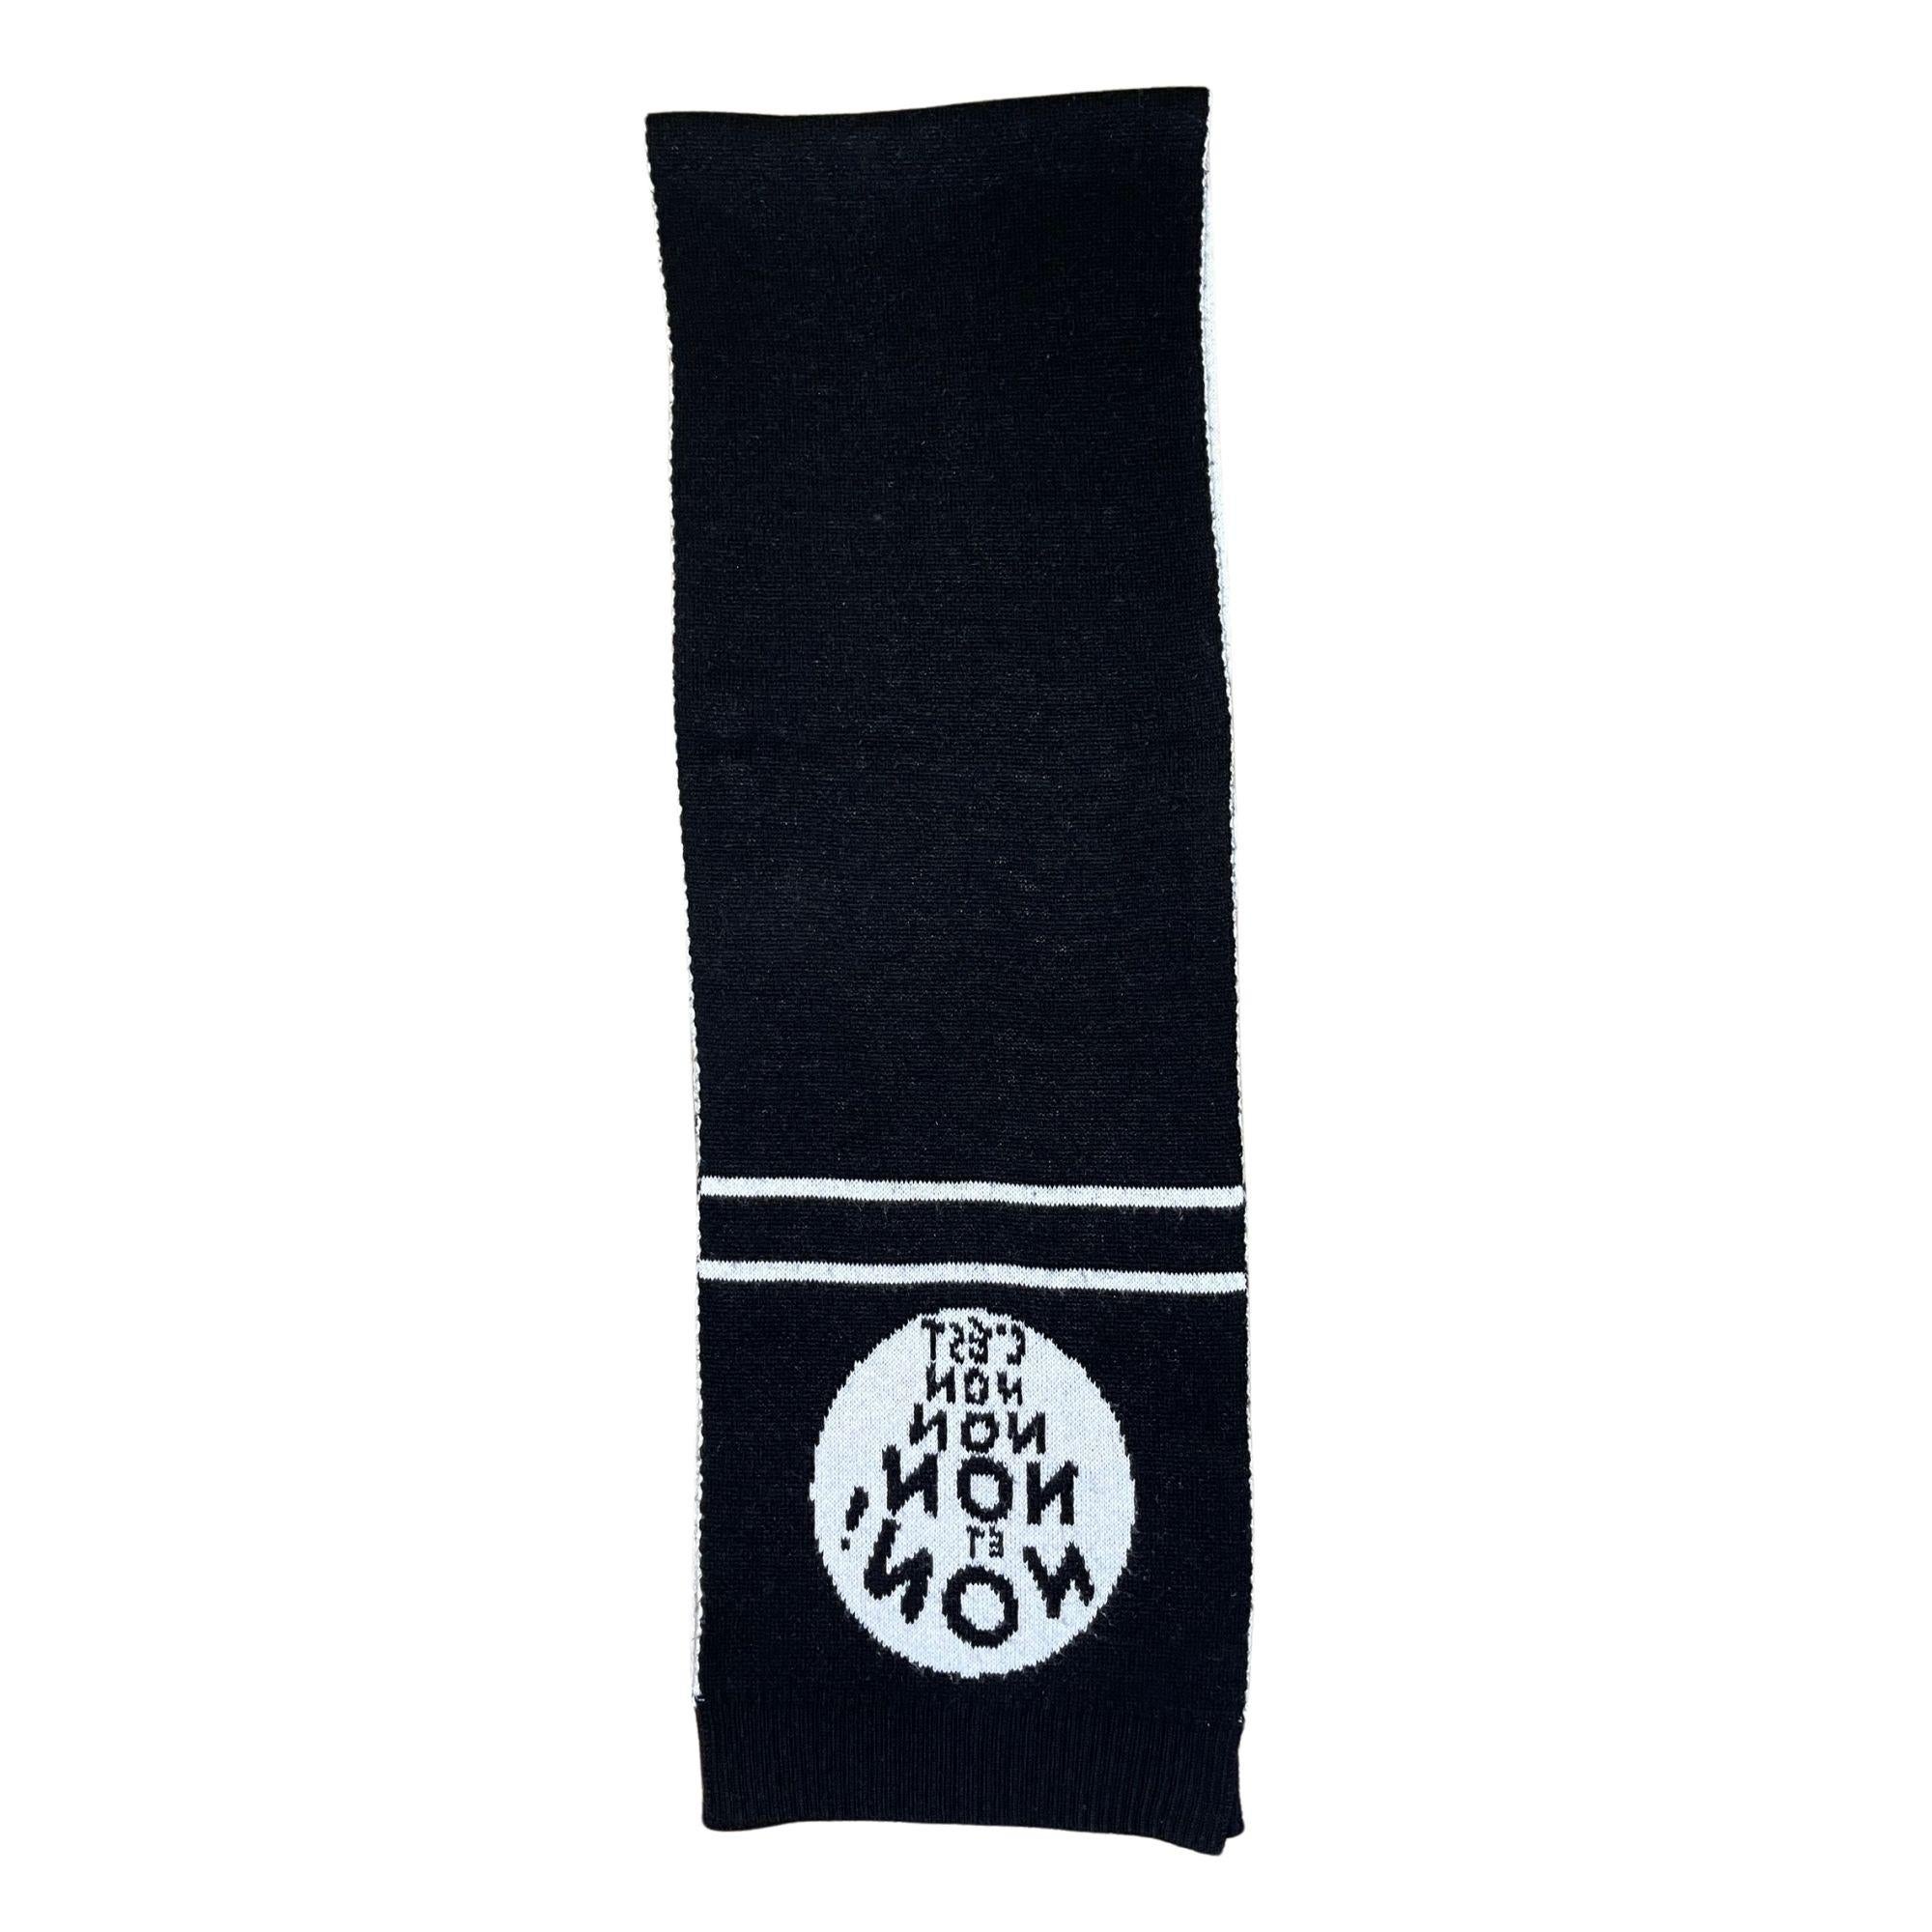 Classic Dior black and white scarf. Very soft and a perfect addition to any monochromatic winter look!

COLOR: Black
MATERIAL: Cashmere
MEASURES: H 13.5” x L 80”
CONDITION: Good - pilling, pulled threads, very clean and minimal signs of use.

Made